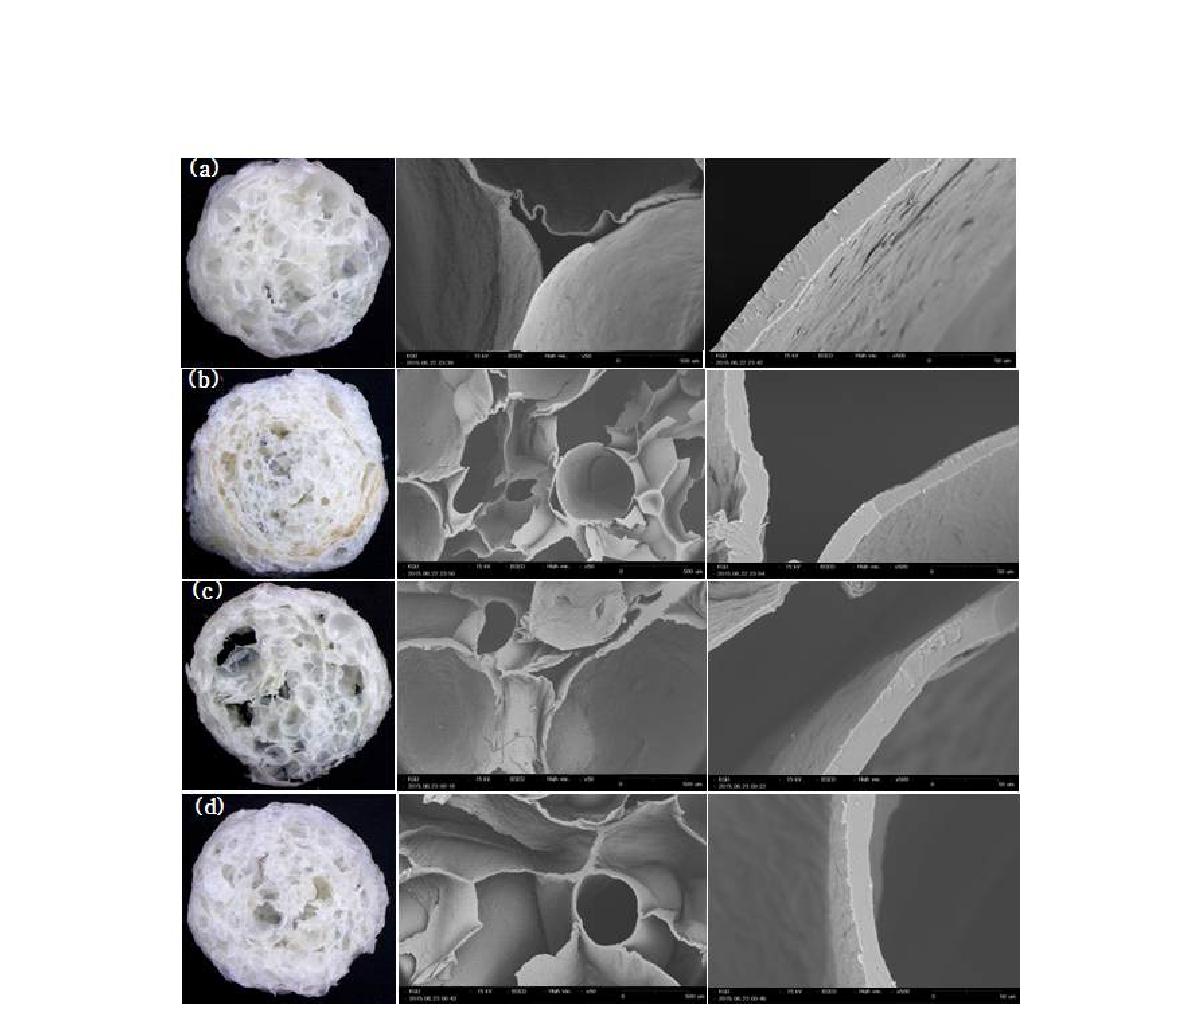 Appearance and microstructure of extruded rice snack produced from (a) normal head rice without SHS treatment, (b) normal head rice with SHS treatment, (c) baekginju rice without SHS treatment, (d) baekginju rice with SHS treatment; Left; appearance, center; inner microstructure, right; air cell wall